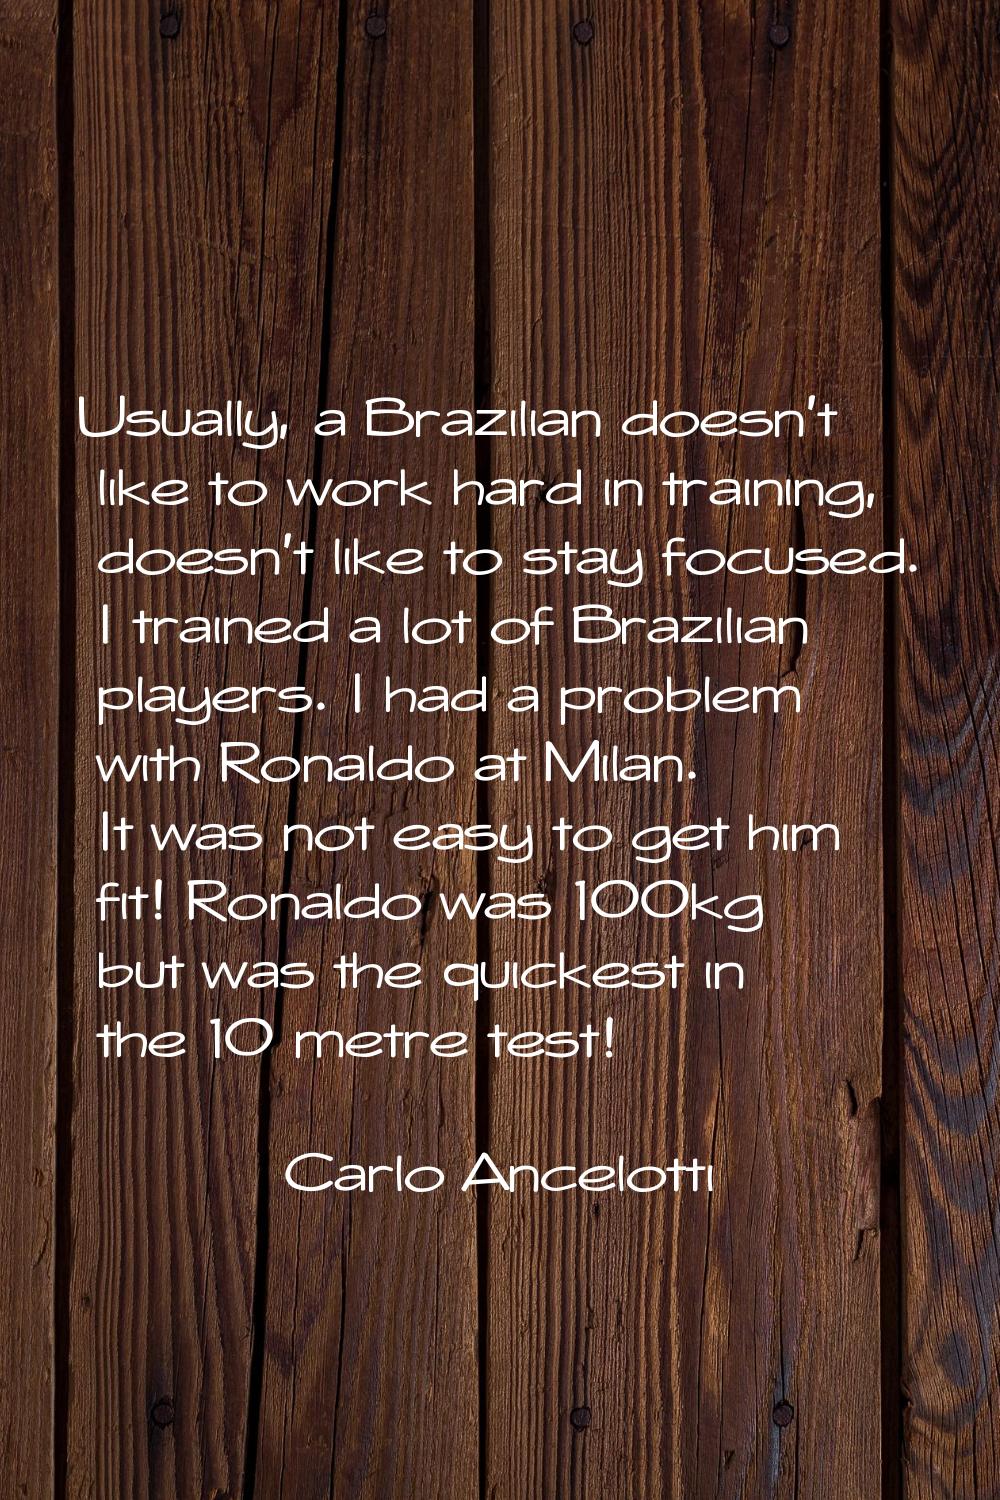 Usually, a Brazilian doesn't like to work hard in training, doesn't like to stay focused. I trained